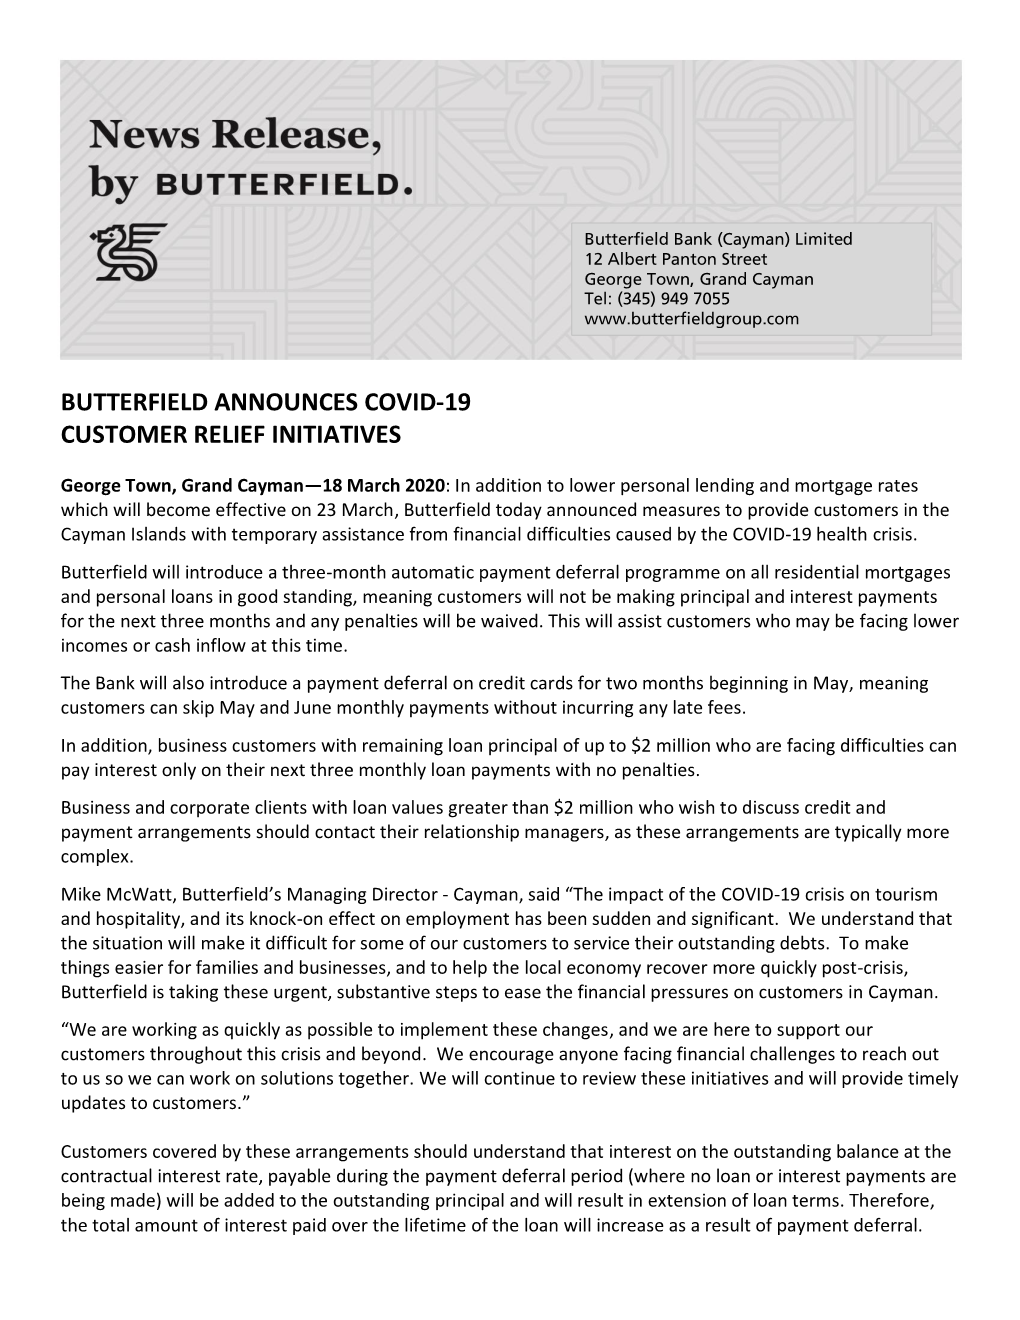 Butterfield Announces Covid-19 Customer Relief Initiatives